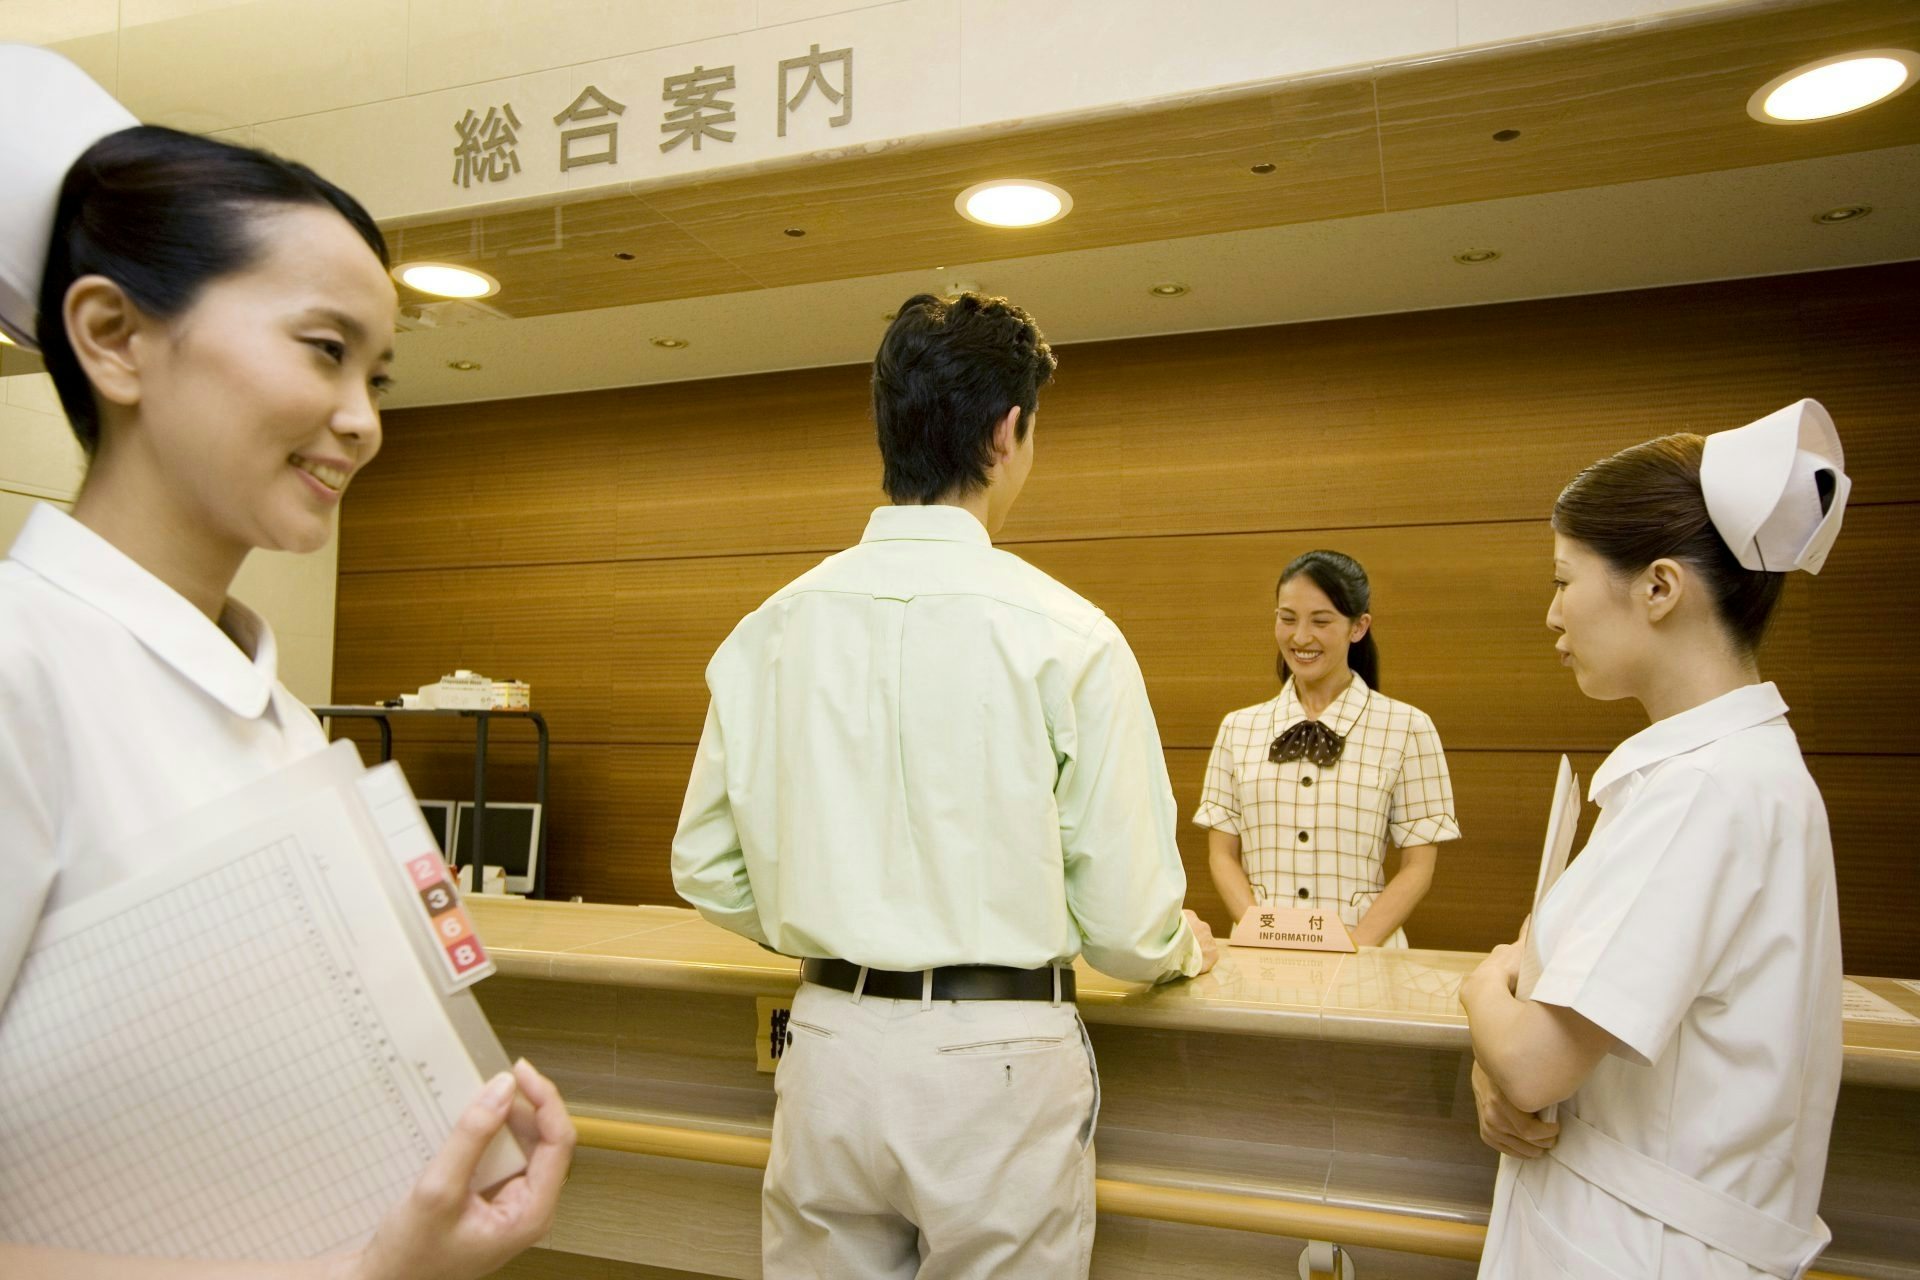 Japan is the most popular destination for China's medical tourists. (Shutterstock)